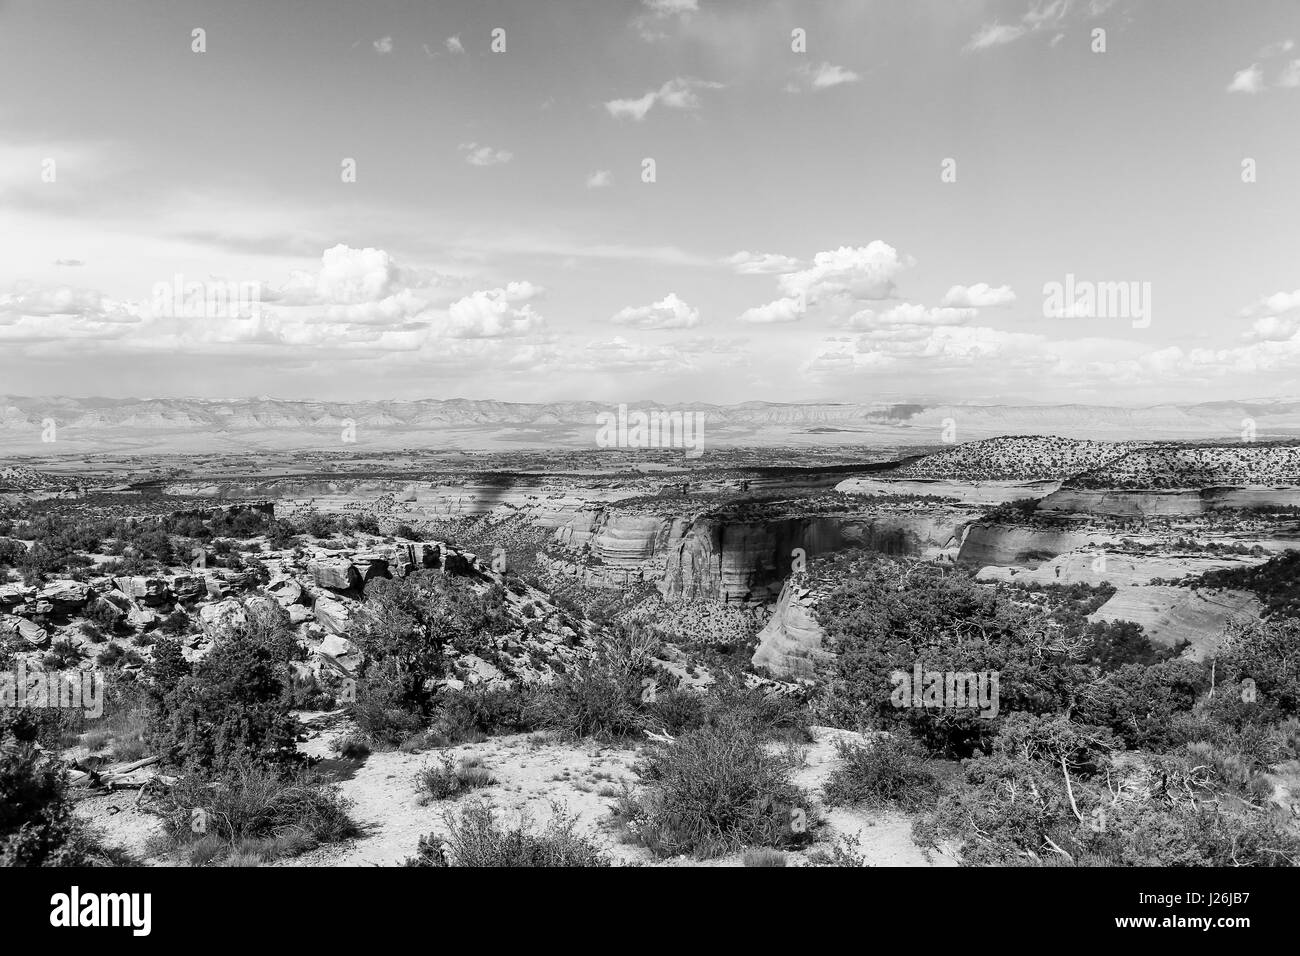 Part of the Colorado National Monument with the Book Cliffs in the back. The picture is in monochrome. Stock Photo